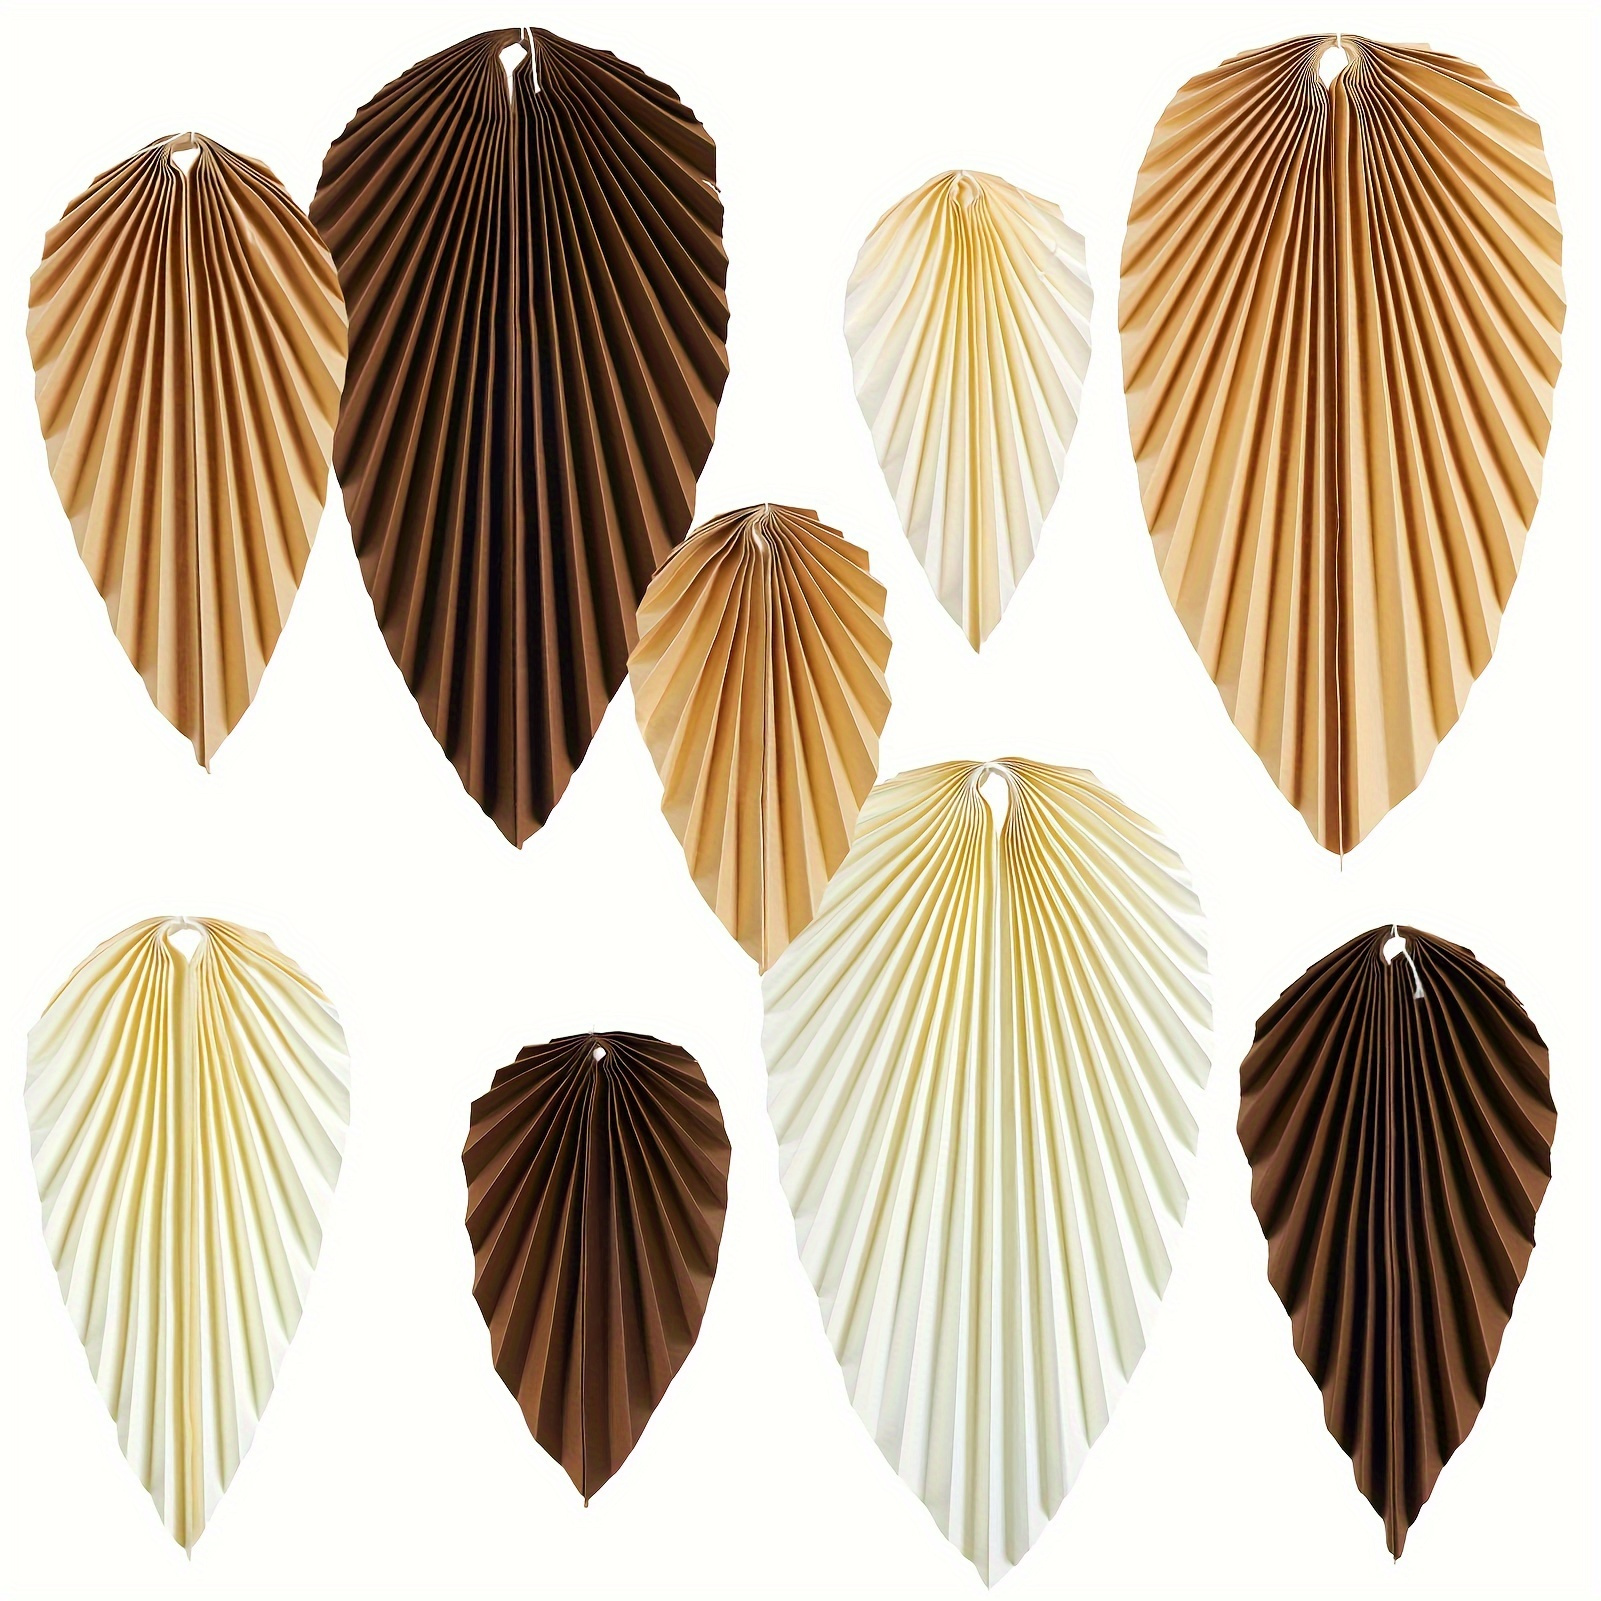 

Boho Chic Paper Fan Decor Set Of 9 - Light & Dark Brown, White | Perfect For Parties, Classroom, And Birthday Backdrops